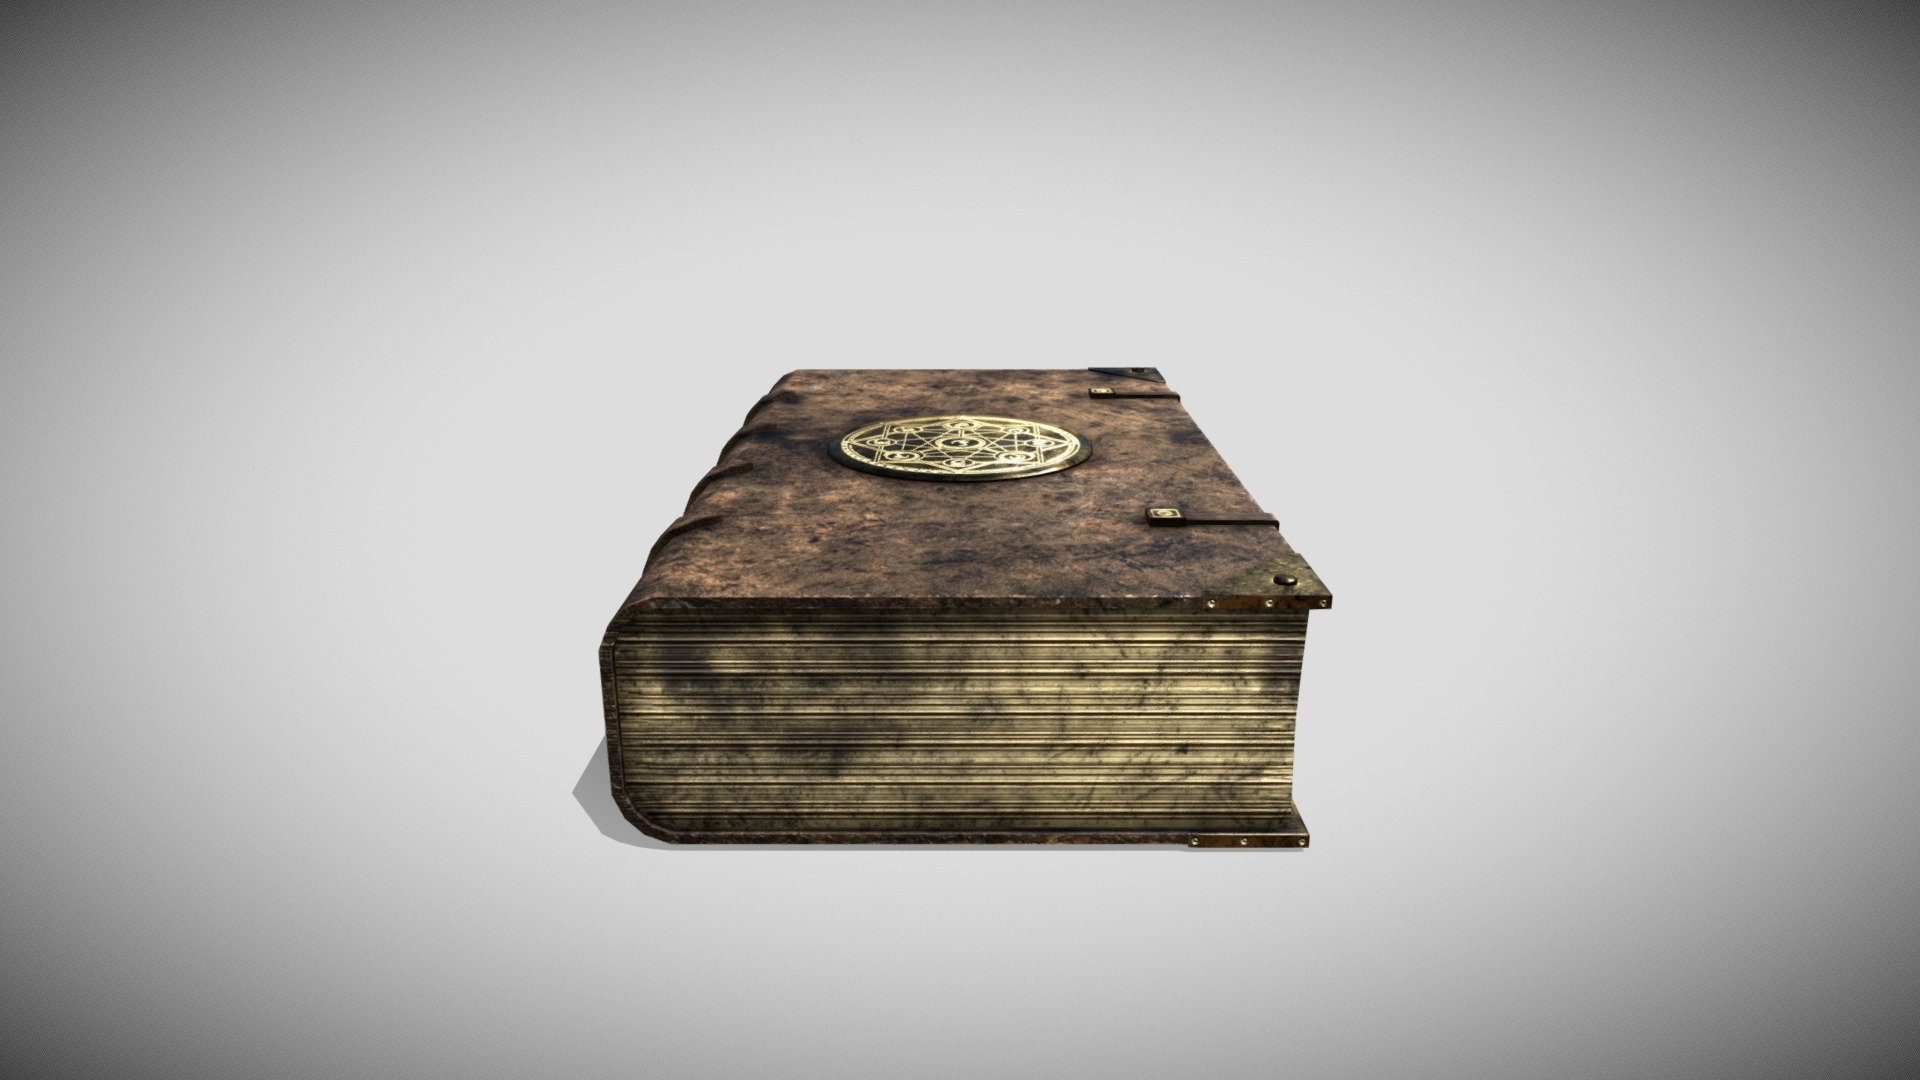 Fantasy/ Magic/ Medival Clasped Book

Low-poly model, PBR, AR/ VR, Google, Unity and UE friendly

Textures; 2048 x 2048, base, metal, rough, normal and height maps supplied.

OpenGL, Dilation + single colour background, 16 pixel padding.

If you require further information on this model, or a particular format, please do not hesitate to ask 3d model